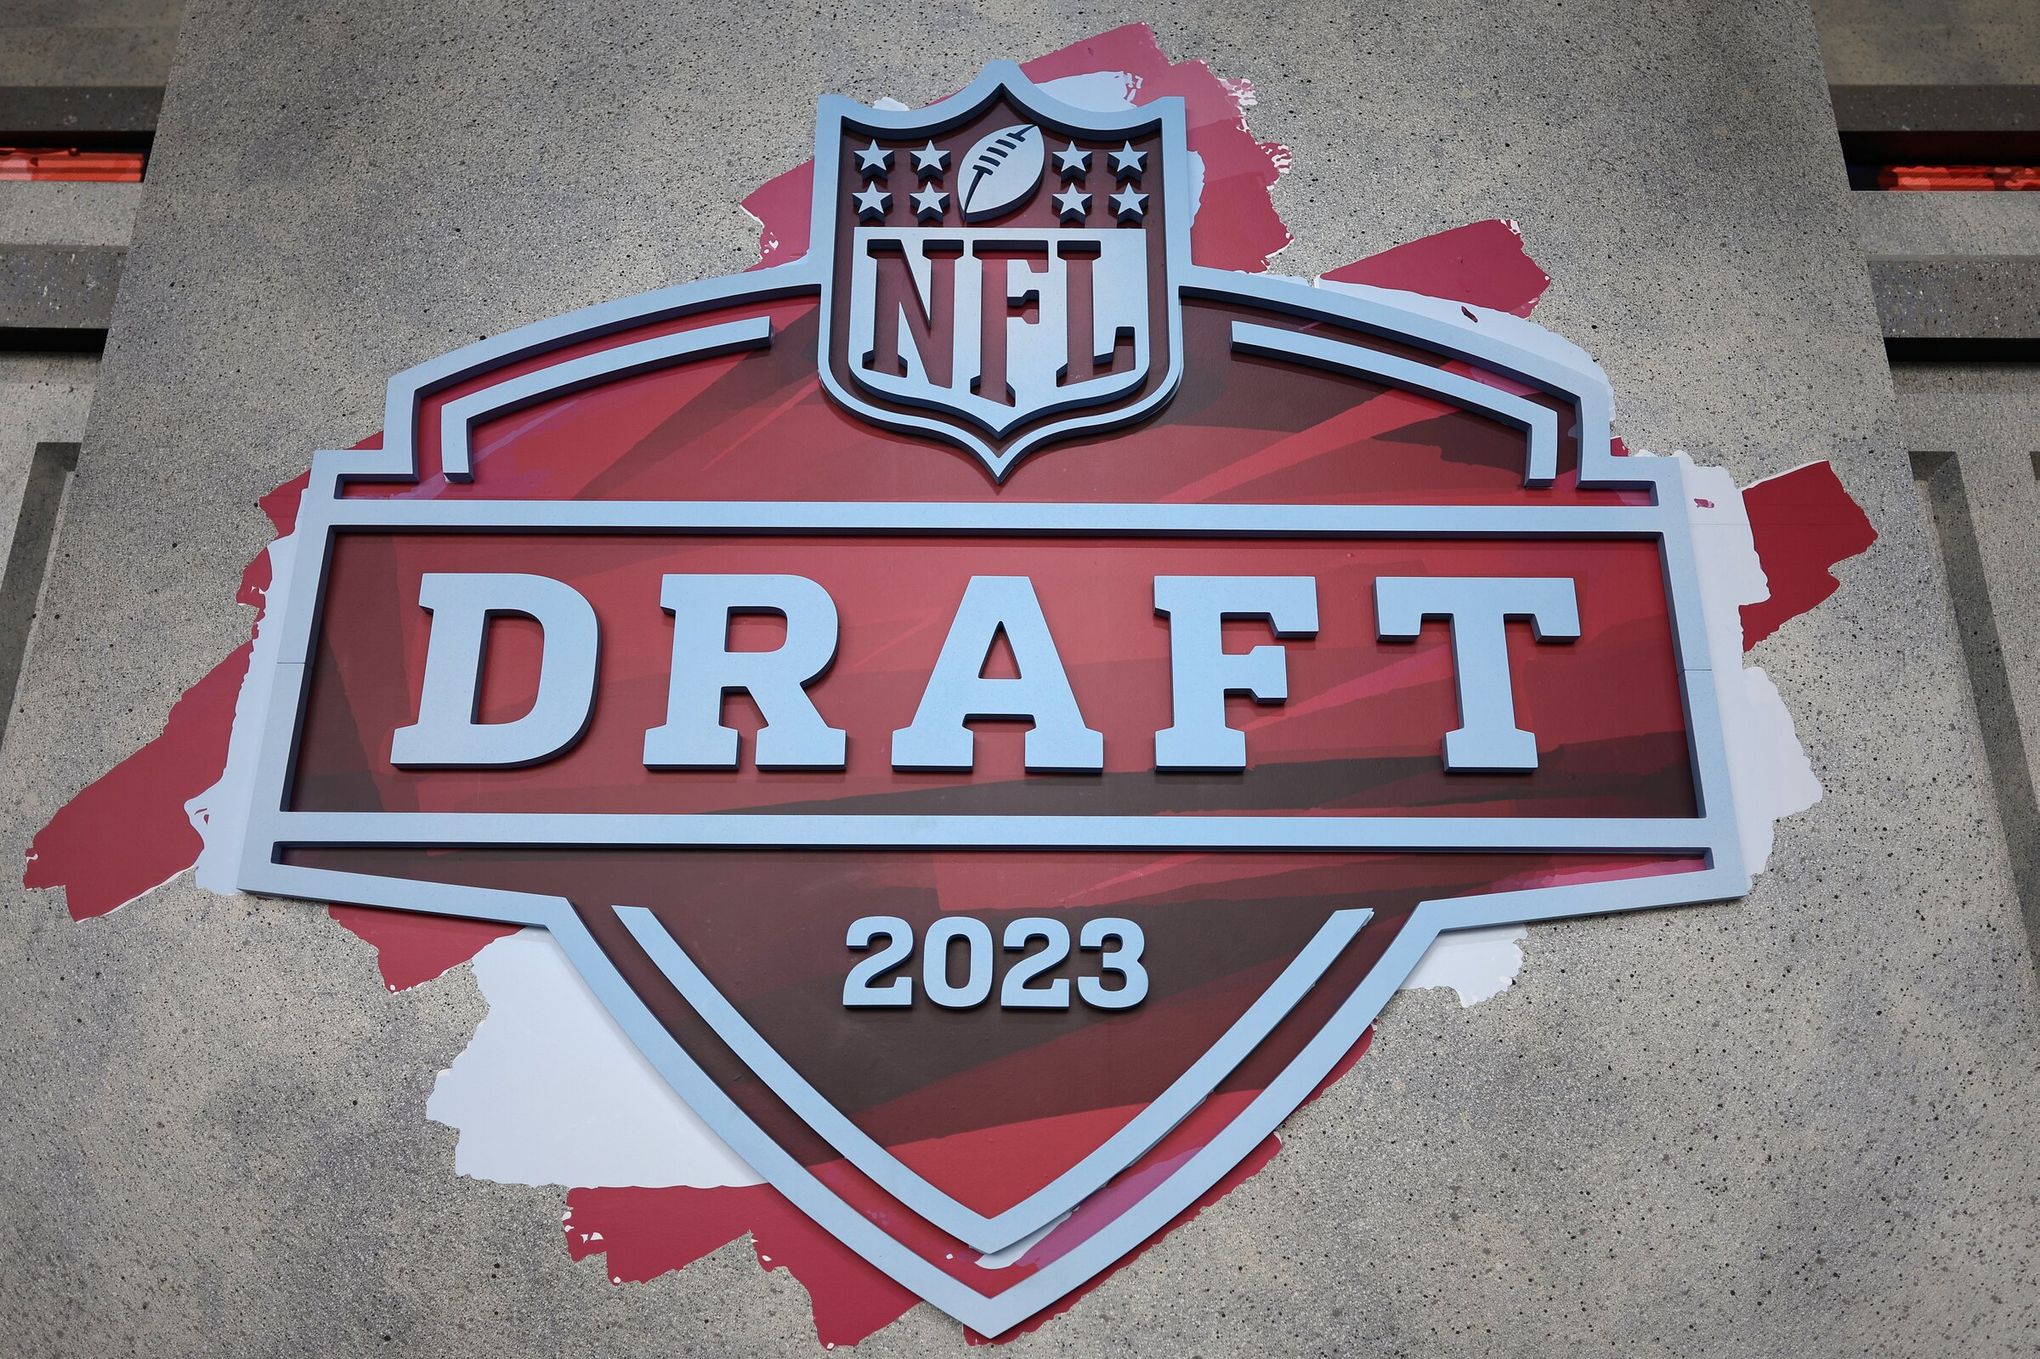 Kansas City, we are on the clock: NFL Draft Day is finally here.